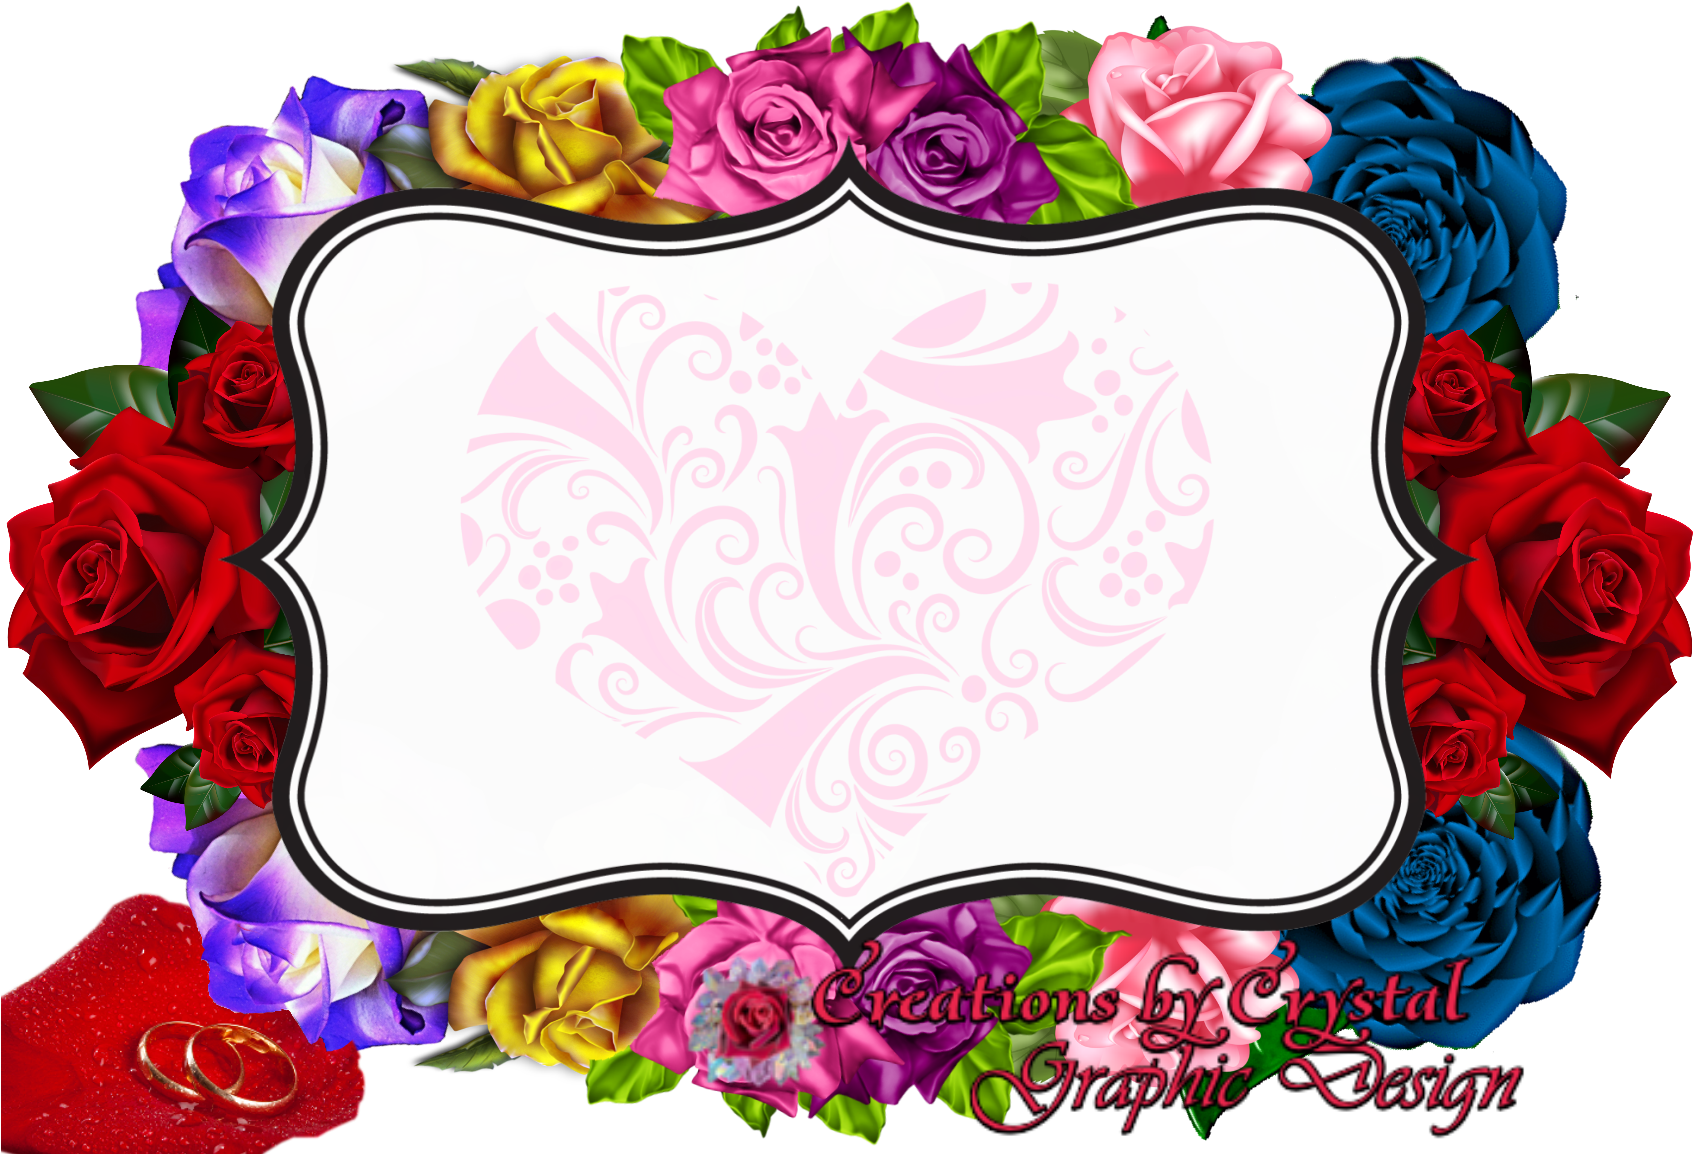 Wedding Cbycgraphicdesign Custom Borders Floral, Creations - Border Designs Flowers Cut Outs (1703x1161)